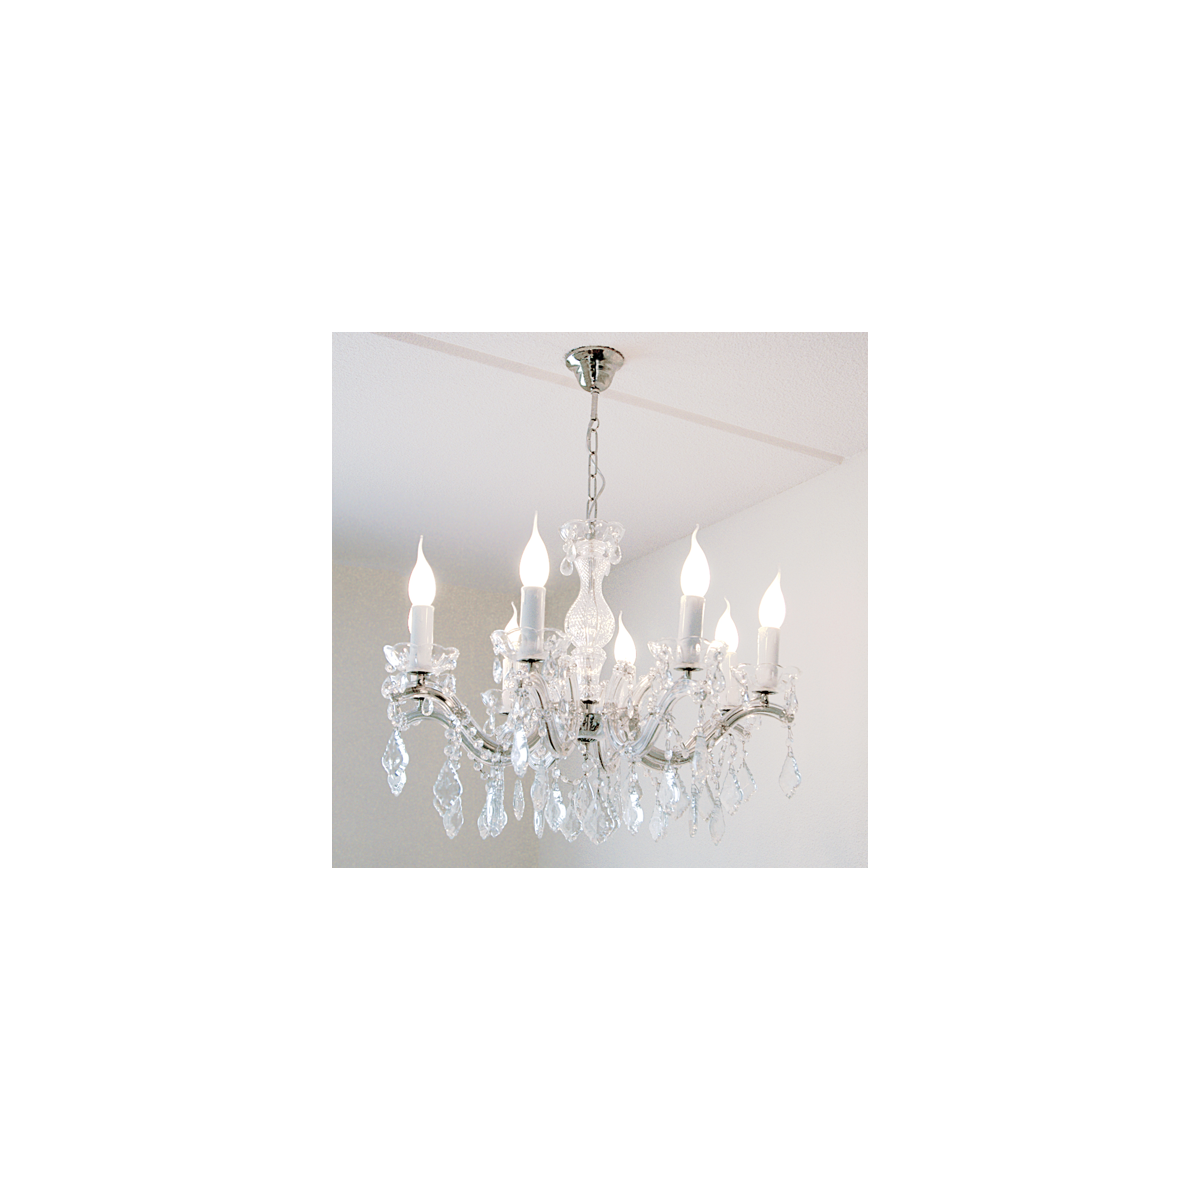 How to Clean Glass Chandeliers